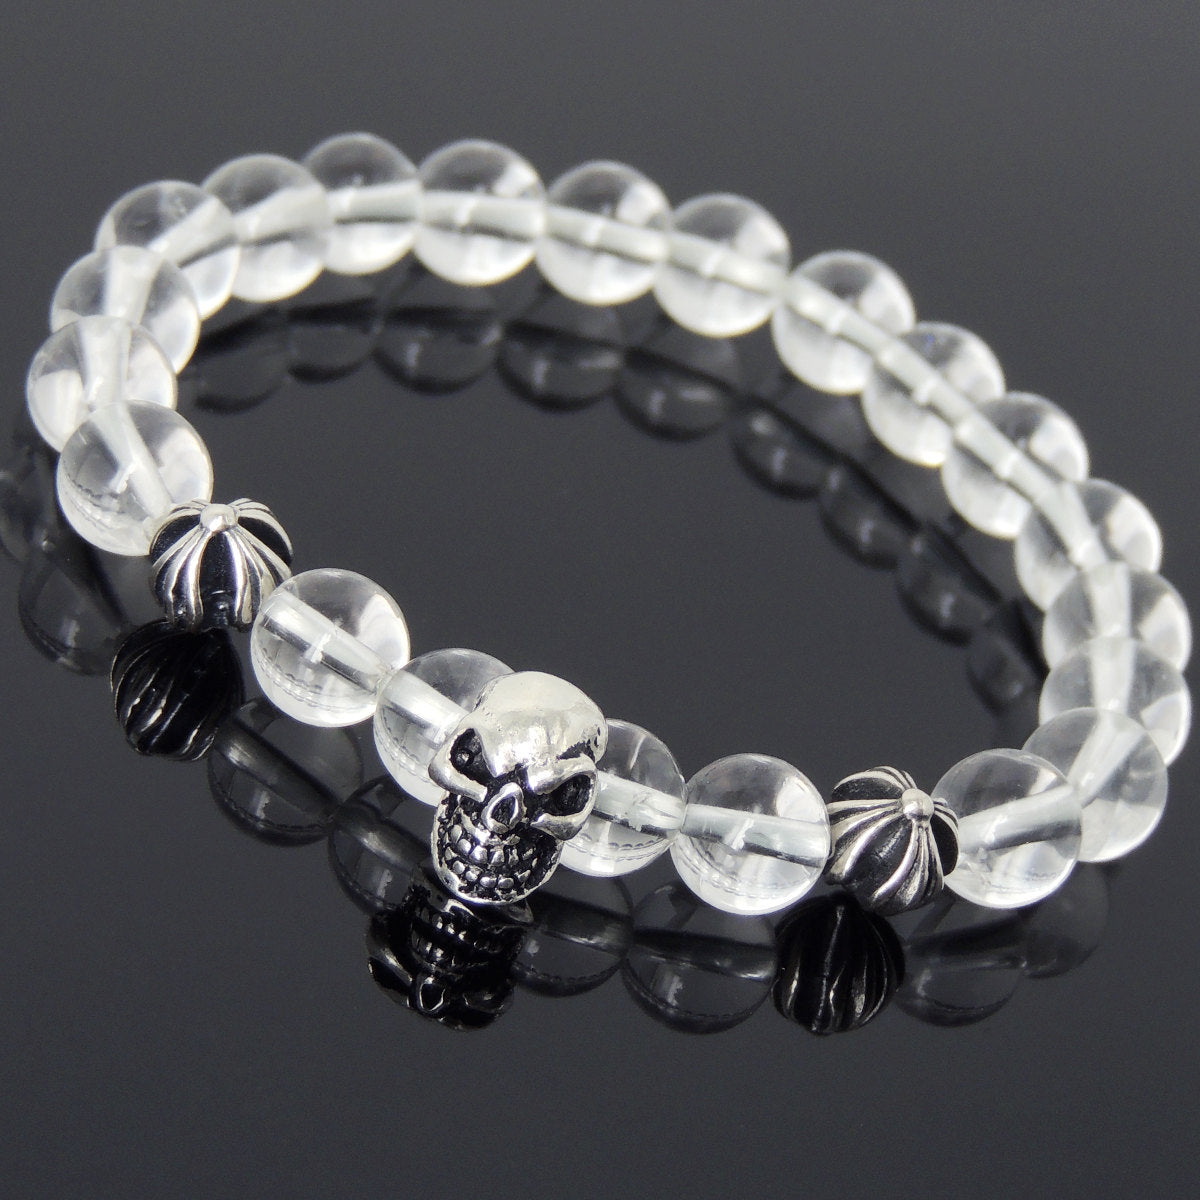 8mm White Crystal Quartz Healing Gemstone Bracelet with S925 Sterling Silver Protective Skull & Cross Beads- Handmade by Gem & Silver BR759